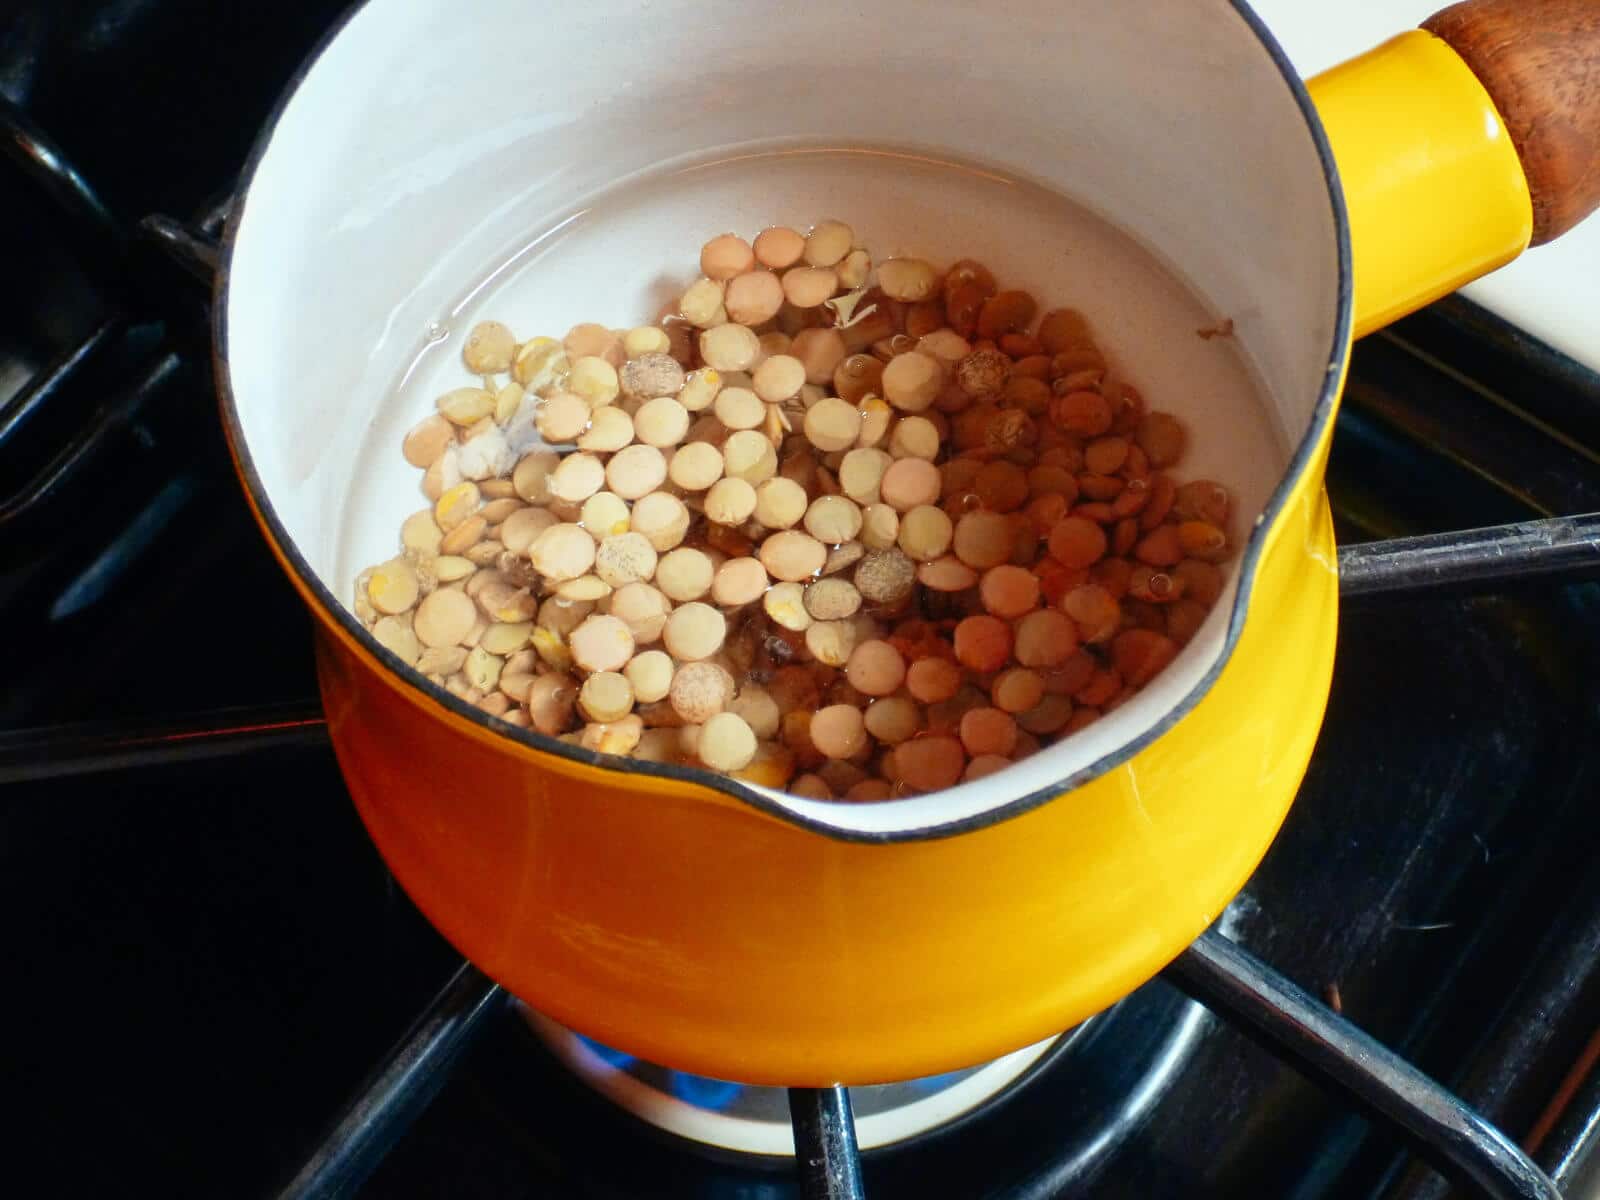 Cook up a hot treat of lentils, split peas, or oatmeal for your chickens